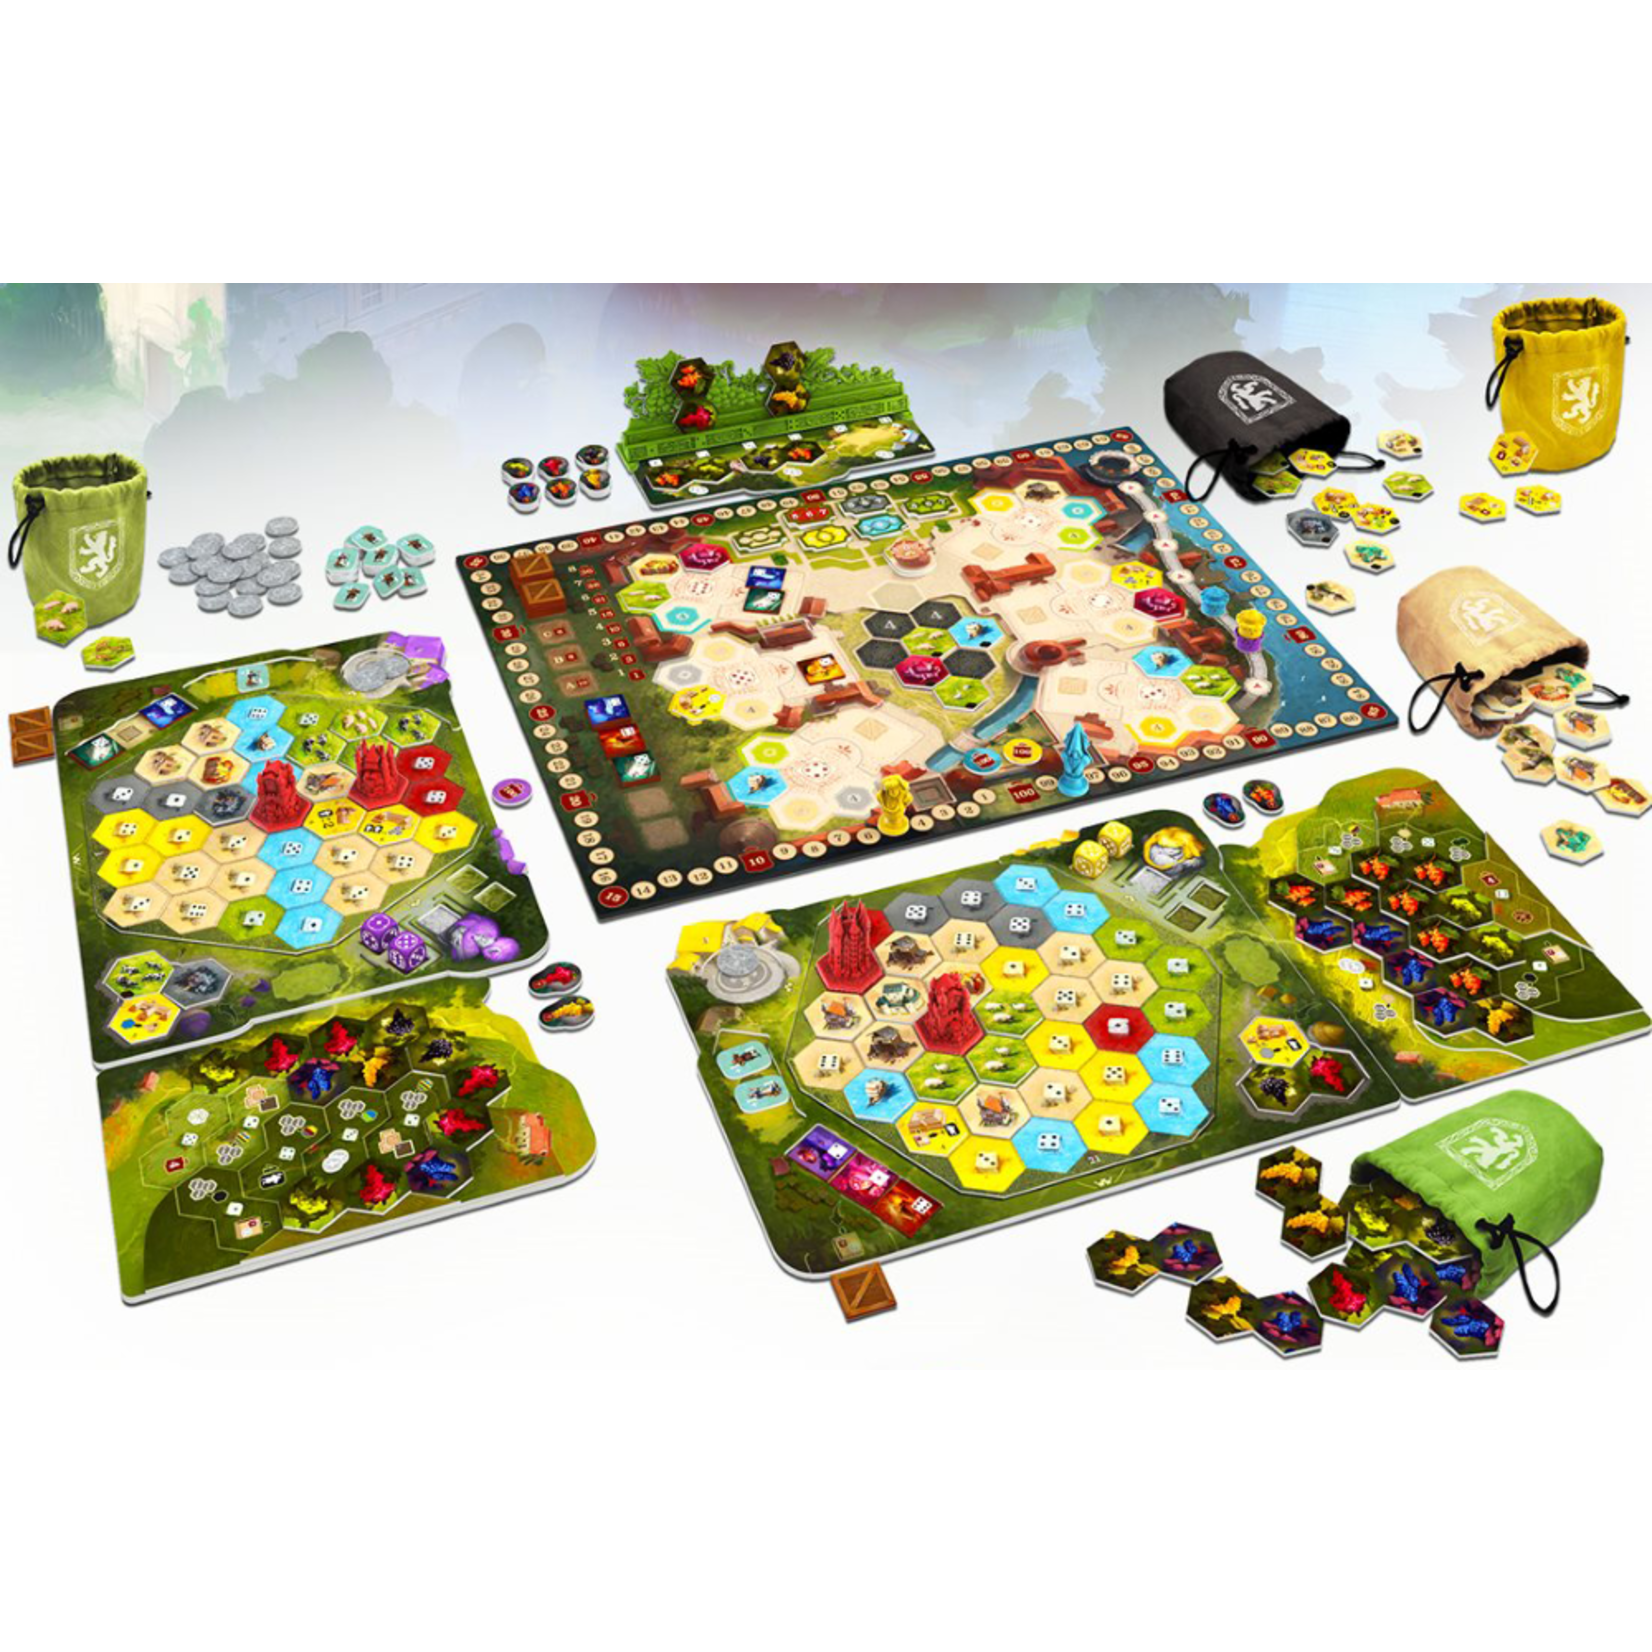 Ravensburger The Castles of Burgundy: Deluxe Edition